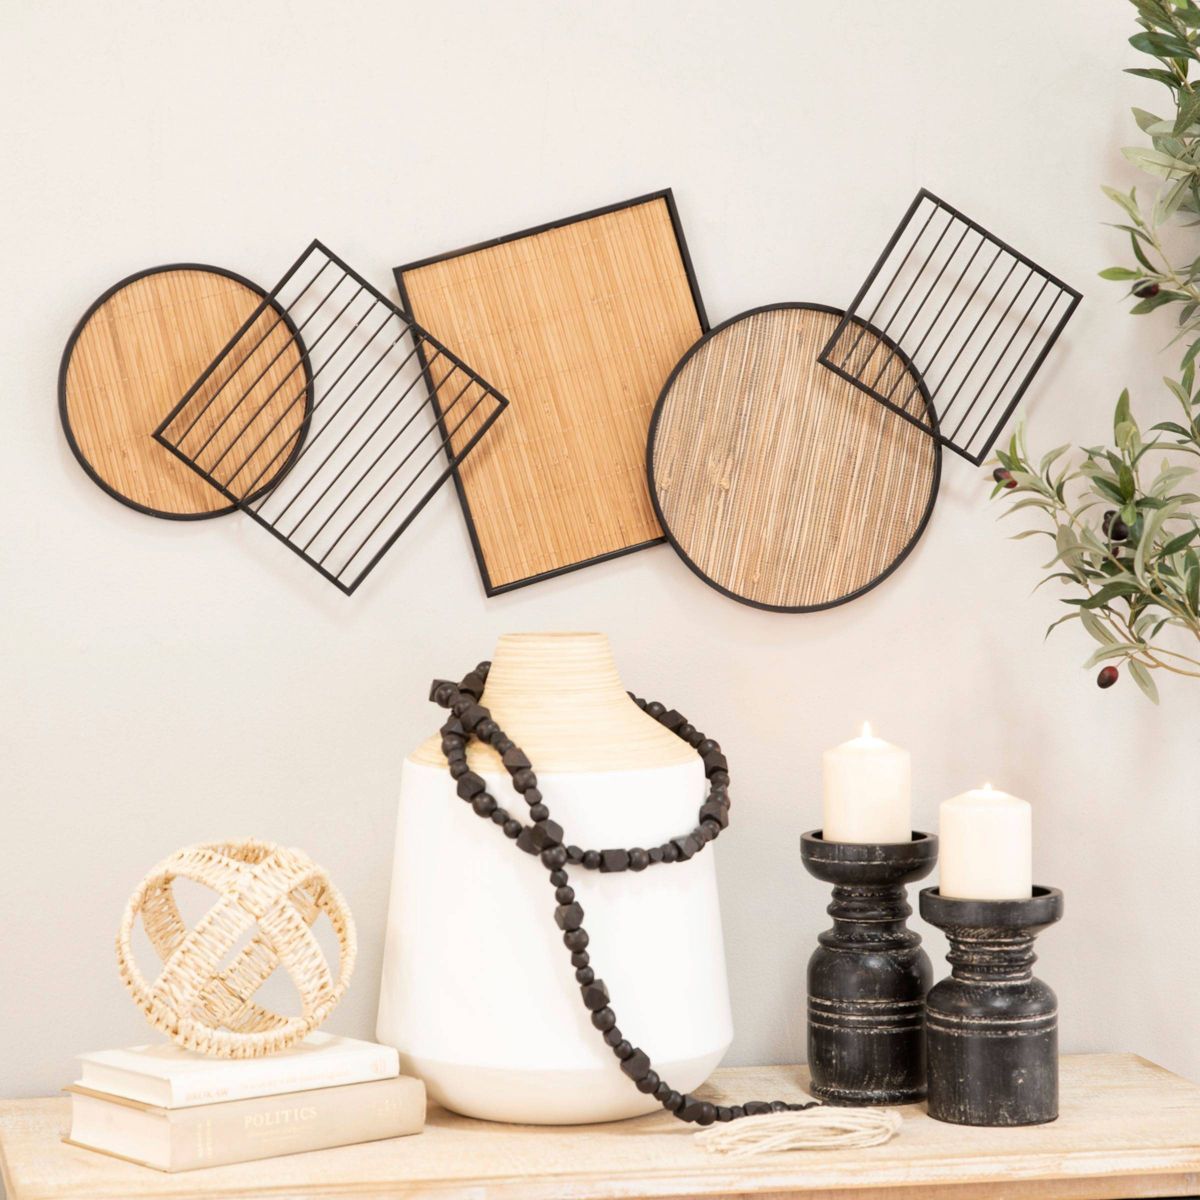 Bamboo Geometric Shapes Wall Decor with Metal Wire Frames Brown - Olivia & May | Target